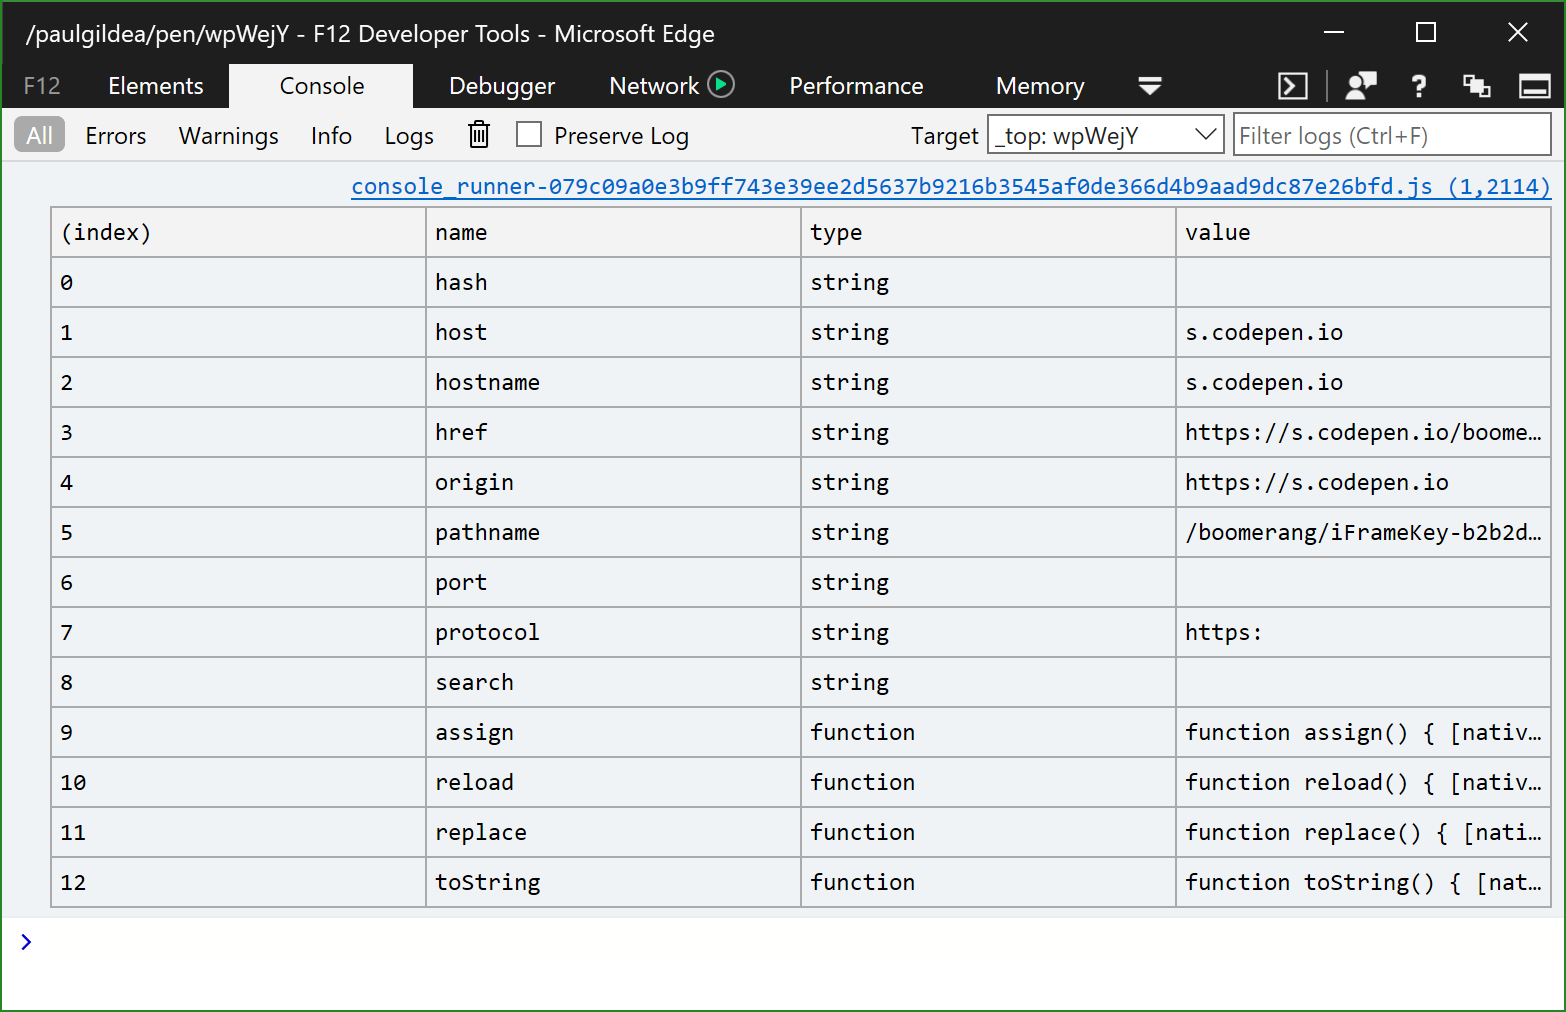 Screen capture of the DevTools Console output showing a formatted table with four columns.